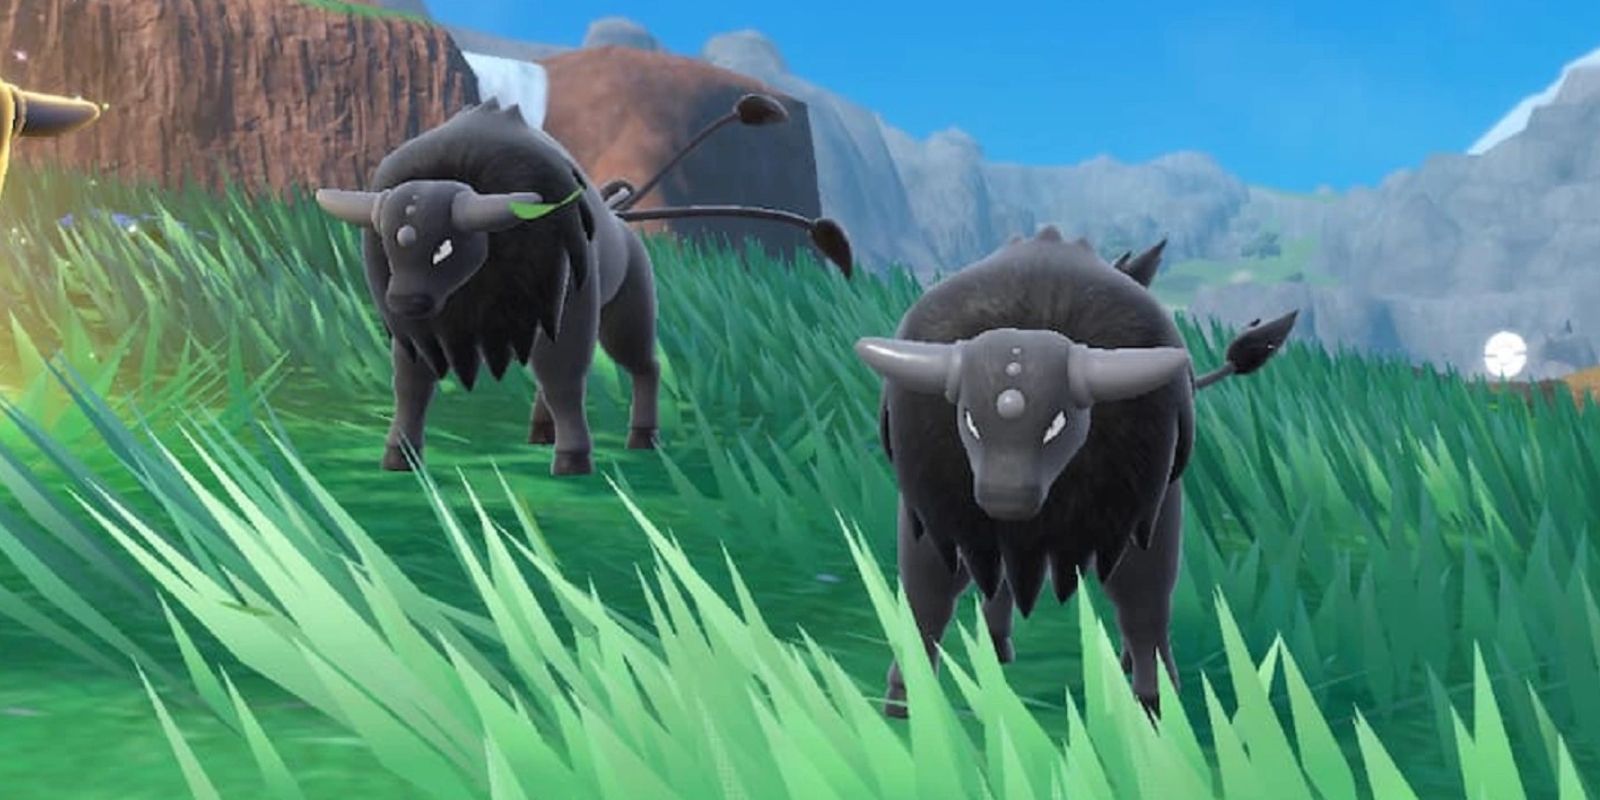 Two Tauros, Pokémon that resemble real-world bulls, standing in a grass field with a waterfall in the distance.